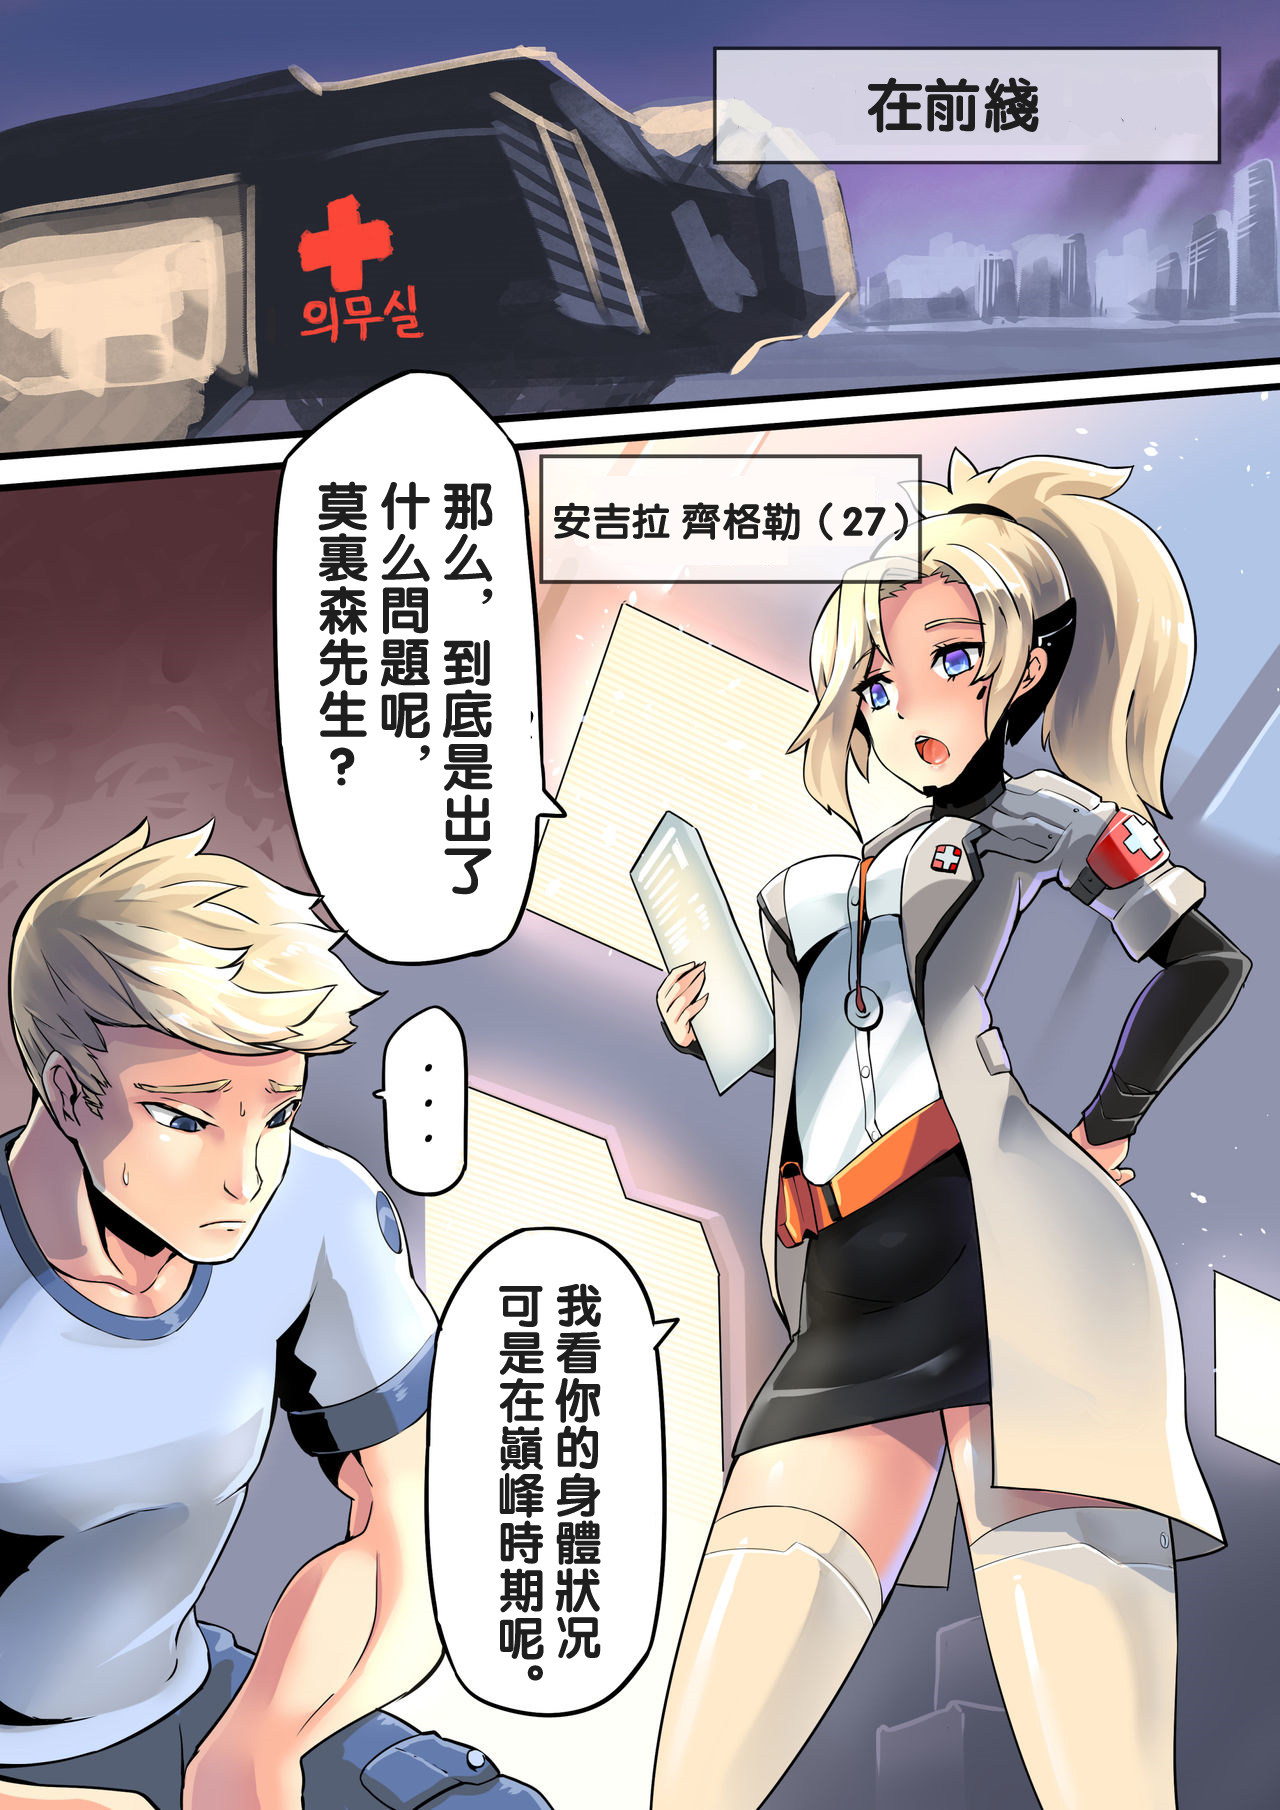 [HM] Mercy Therapy (Overwatch) [Chinese] [沒有漢化] page 3 full